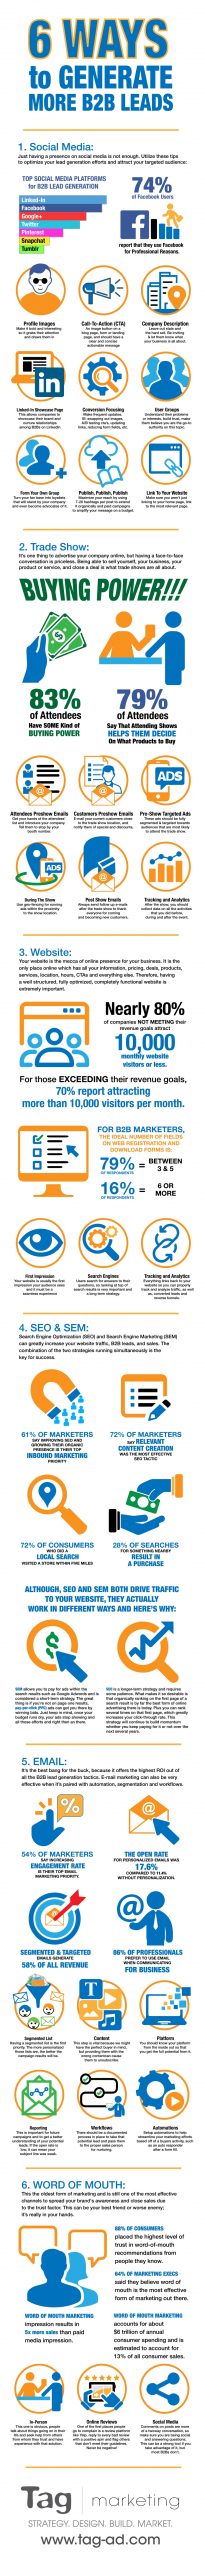 6-ways-to-generate-more-b2b-leads-INFOGRAPHIC